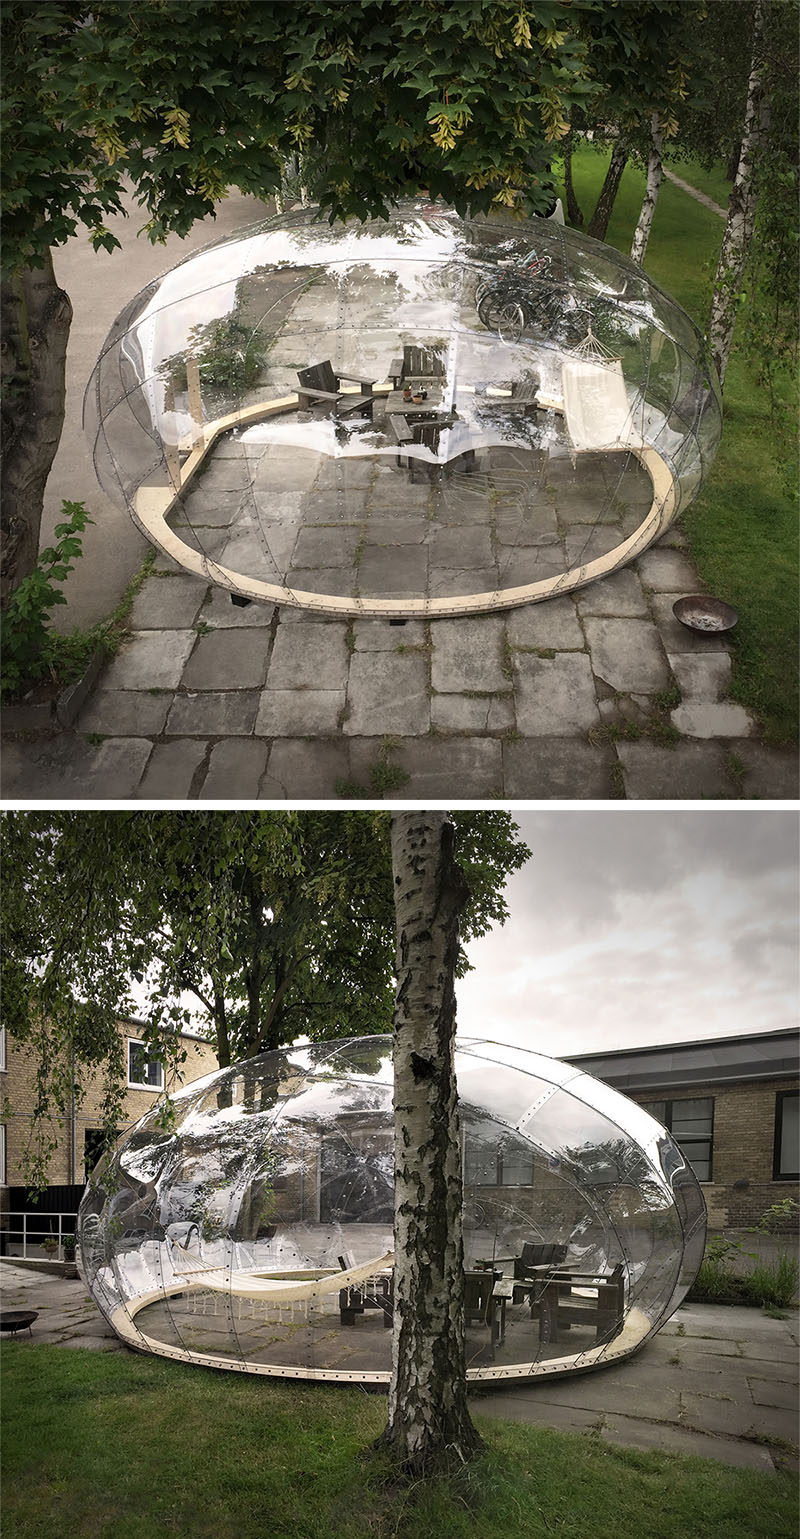 Danish architect Kristoffer Tejlgaard has created an outdoor structure named The Droplet, whose design was inspired by a single drop of water. #OutdoorStructure #BackyardDome #Architecture #Design